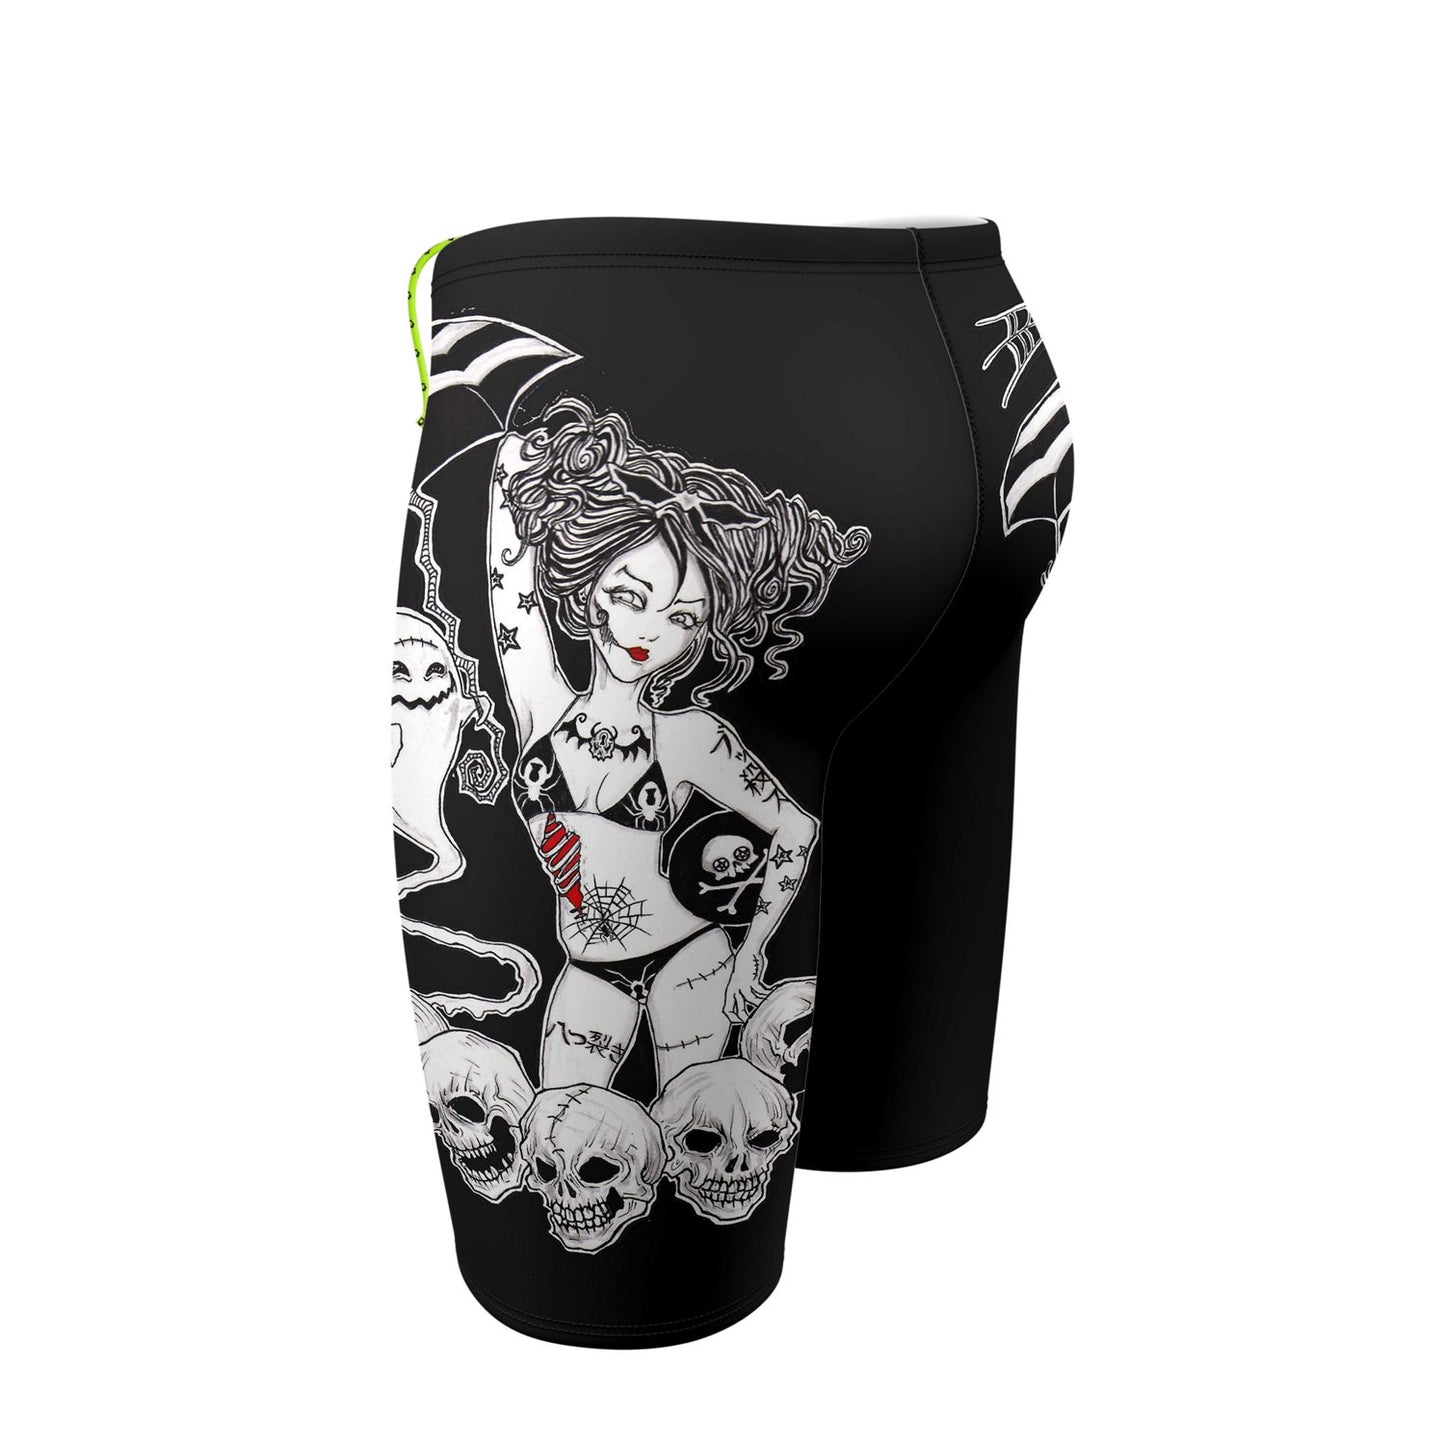 Boys and Ghouls Jammer Swimsuit